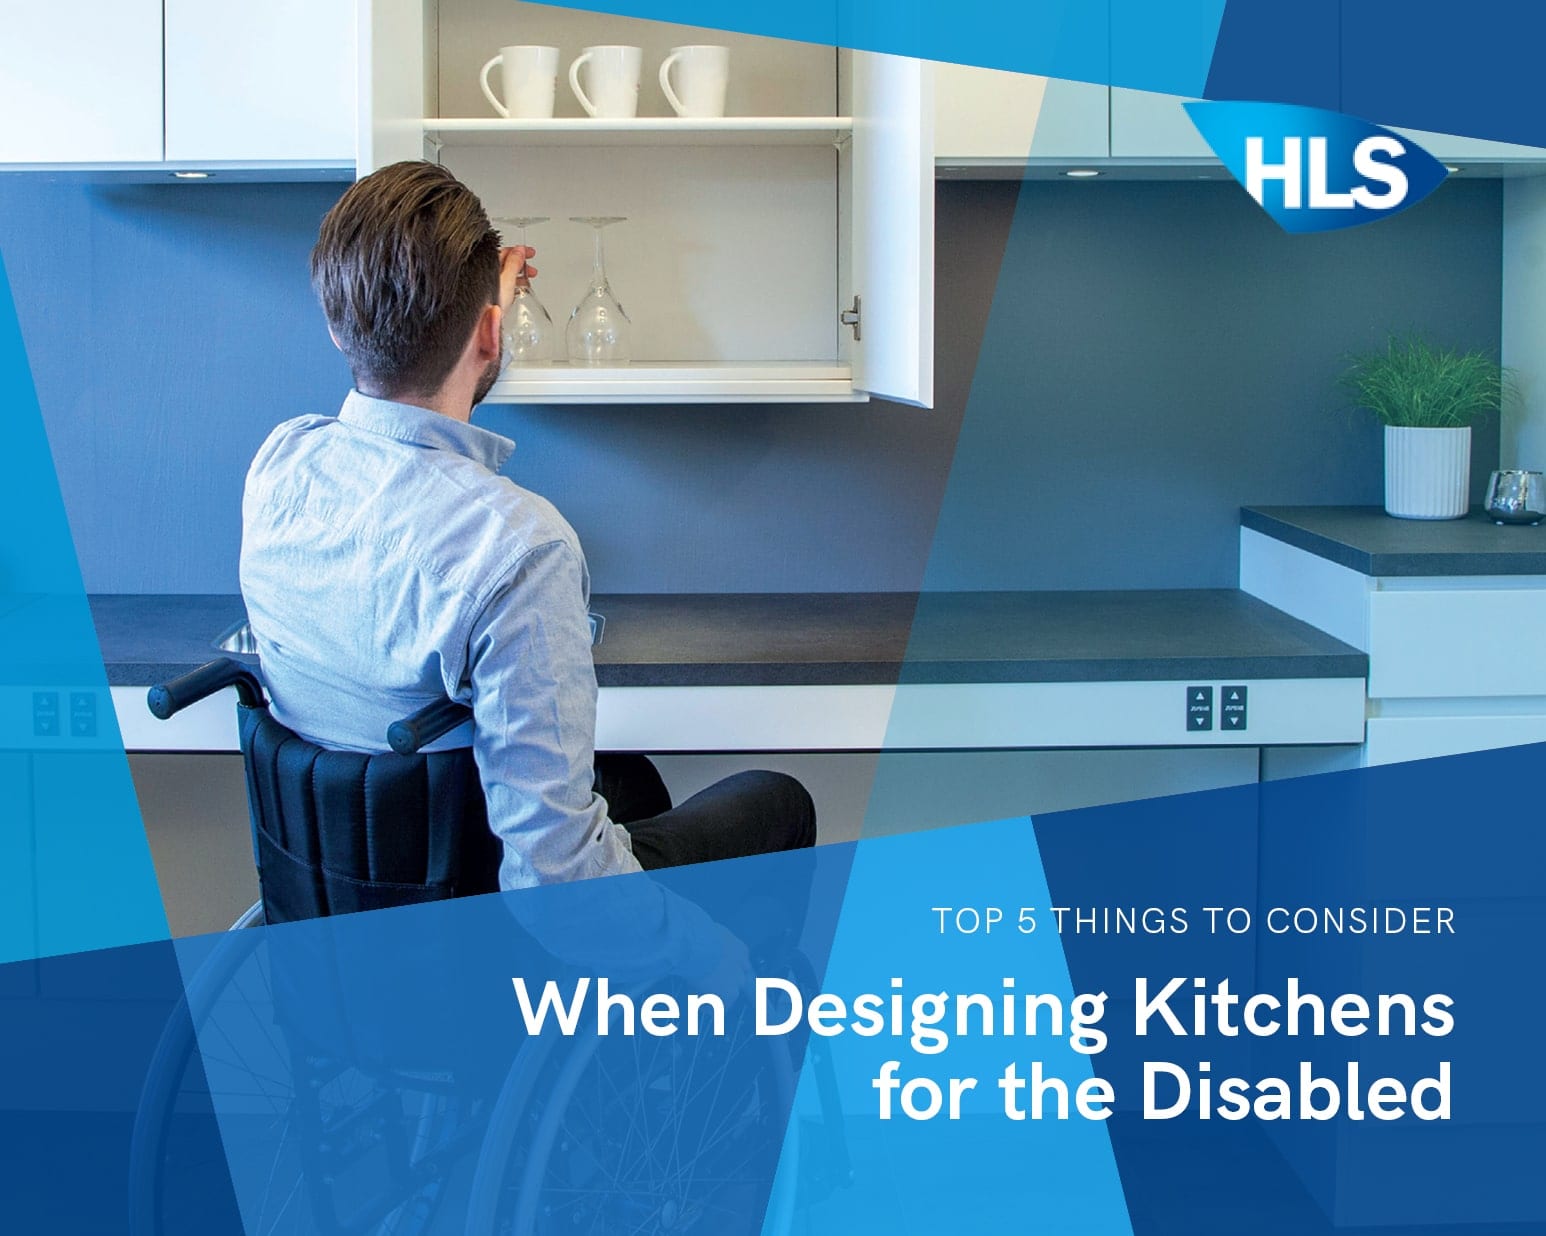 What Are the Characteristics of an Accessible Kitchen?